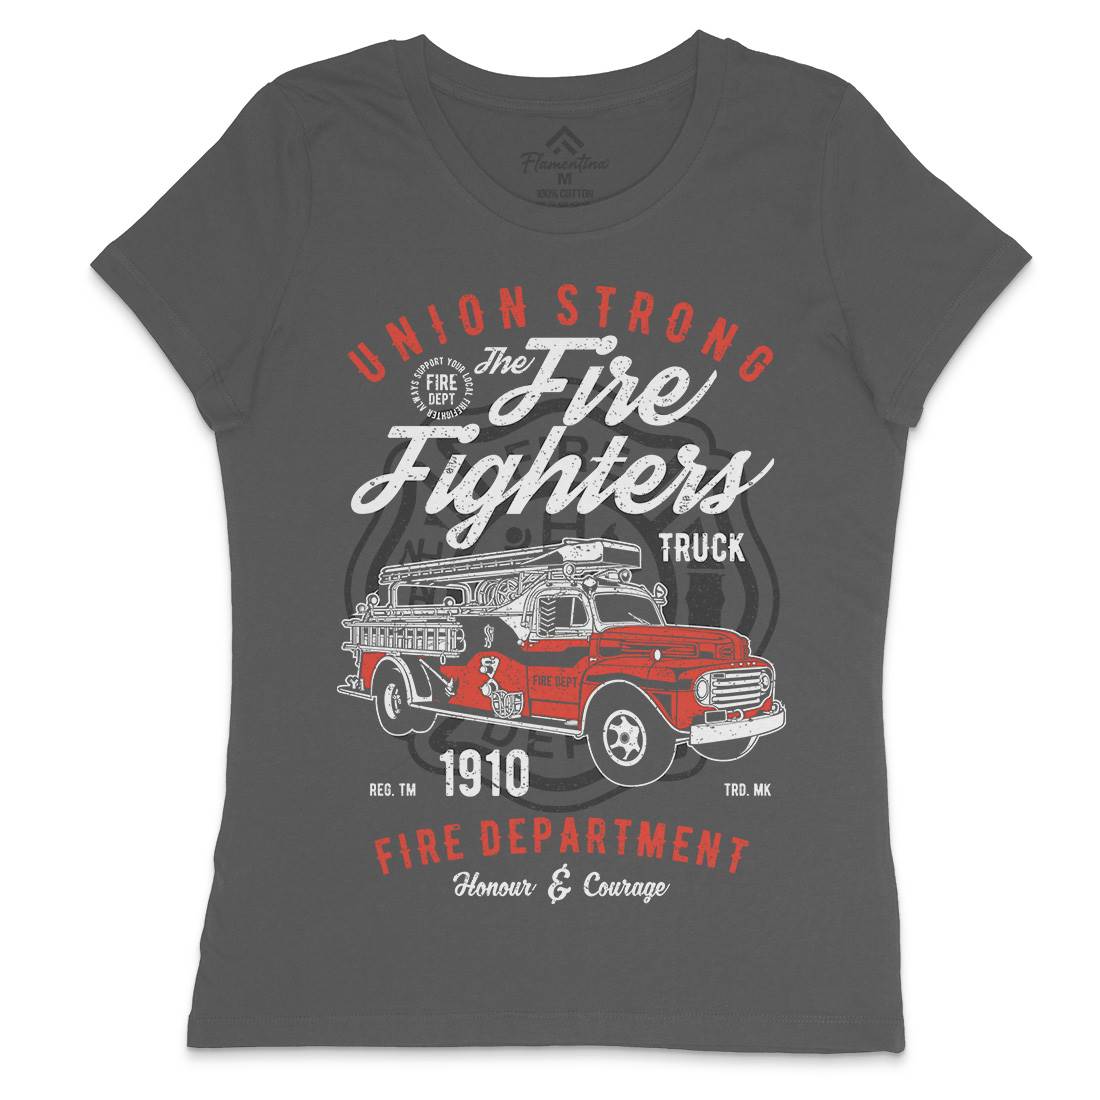 Union Strong Womens Crew Neck T-Shirt Firefighters A781